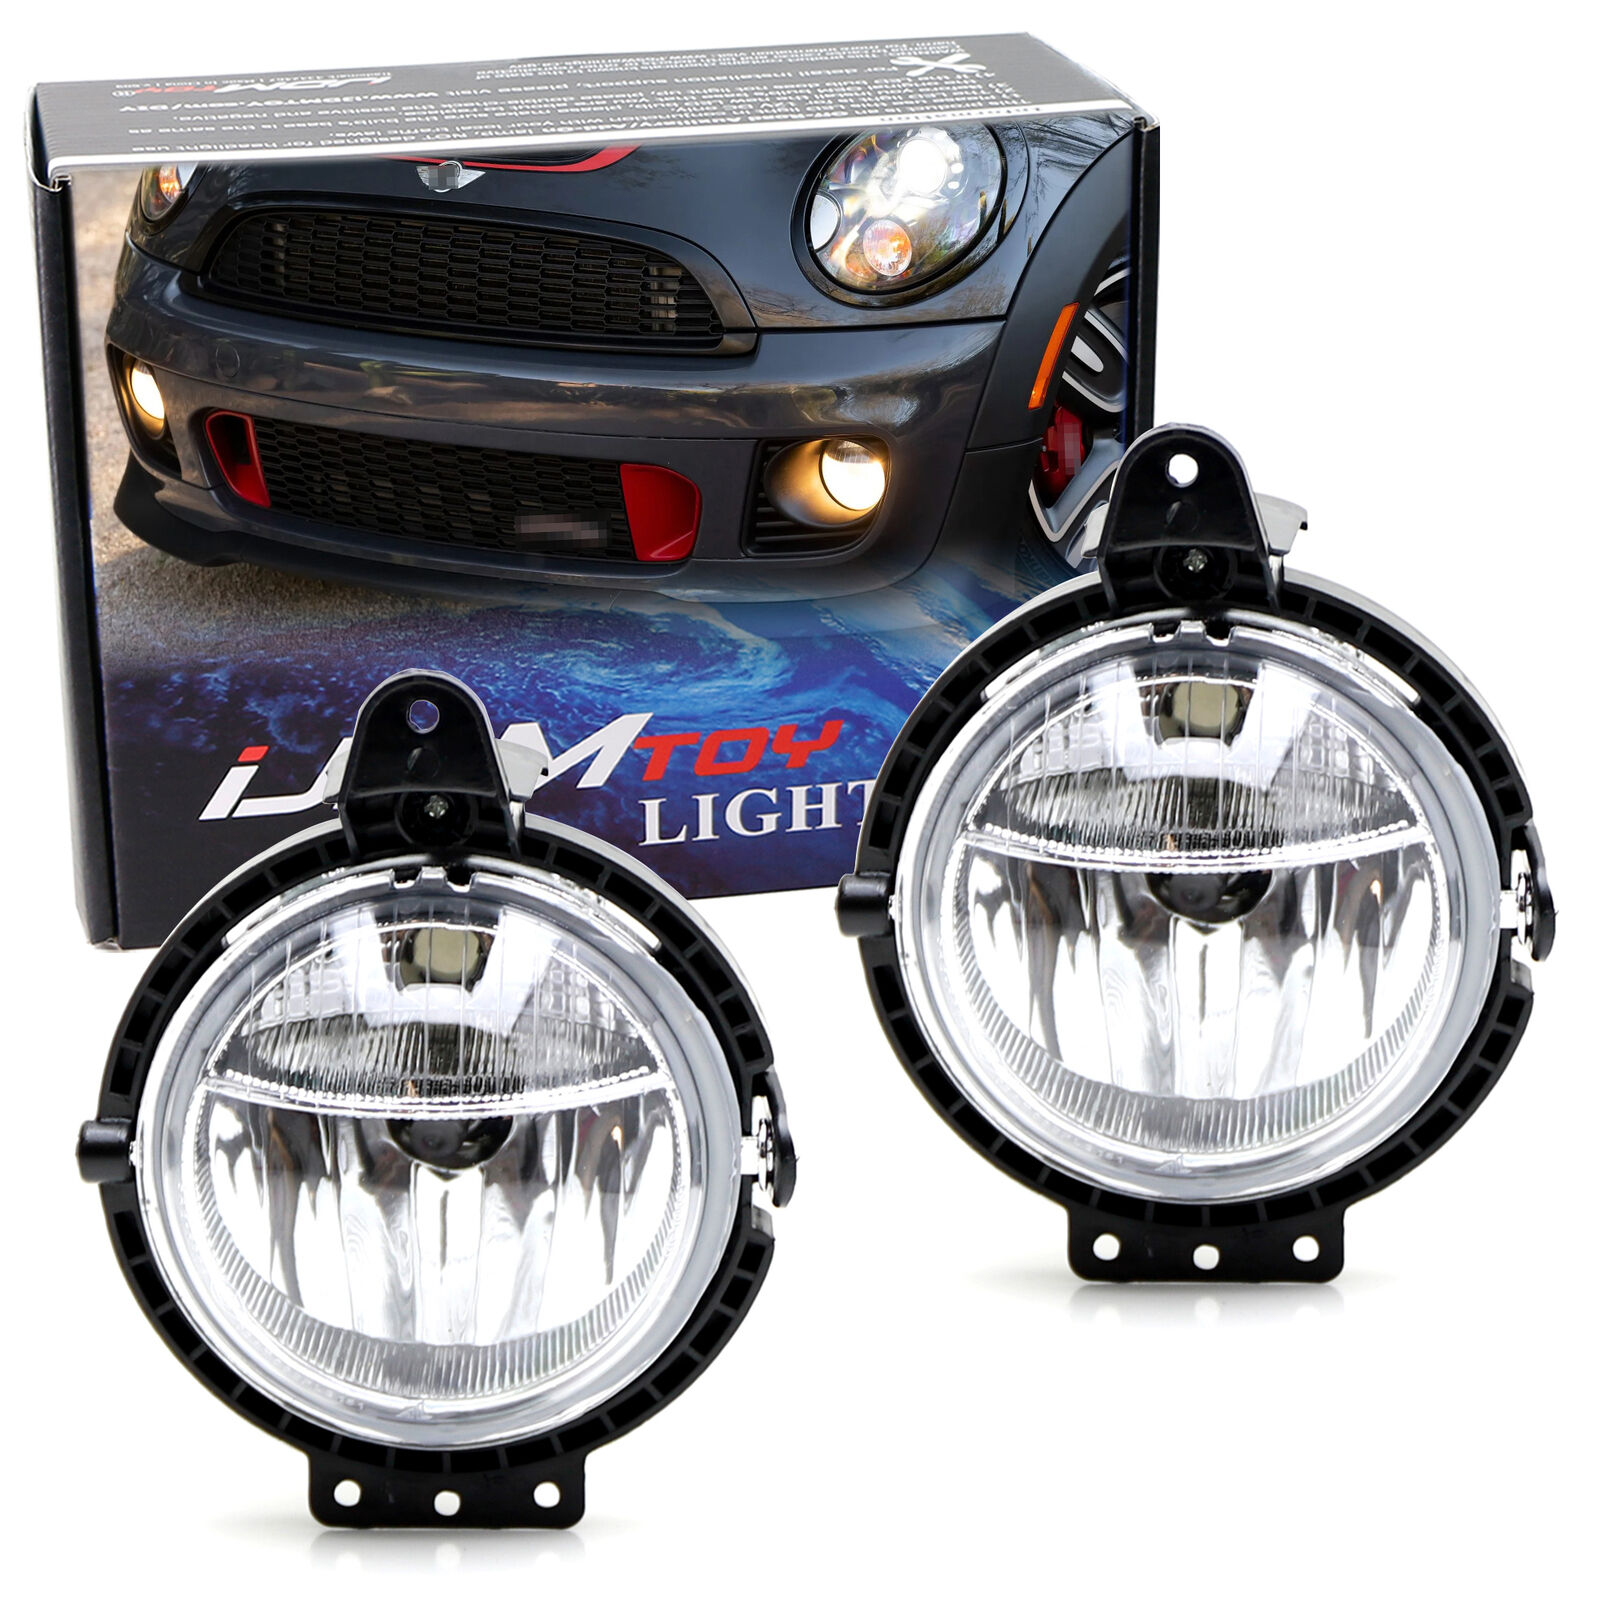 OE-Spec Clear Lens Parking/Fog Combination Lamps For MINI Cooper R56 R57 R58 R60